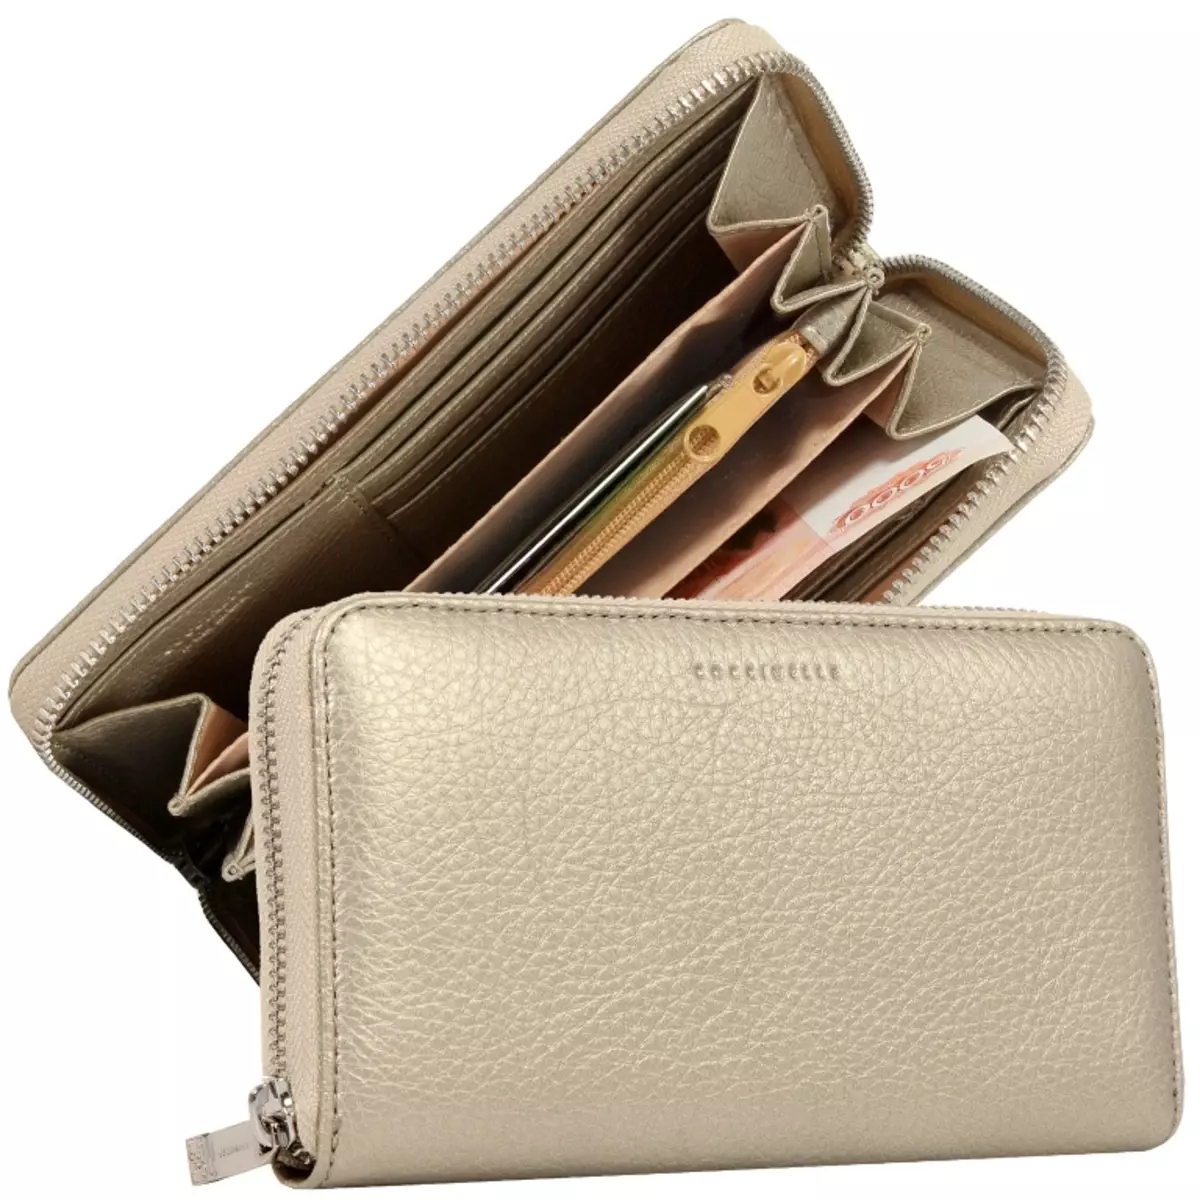 Brand Women's Wallets (100 photos): Overview of the Assortment of Popular Brands Eleganzza, Montblanc, Somuch and Others 15168_46